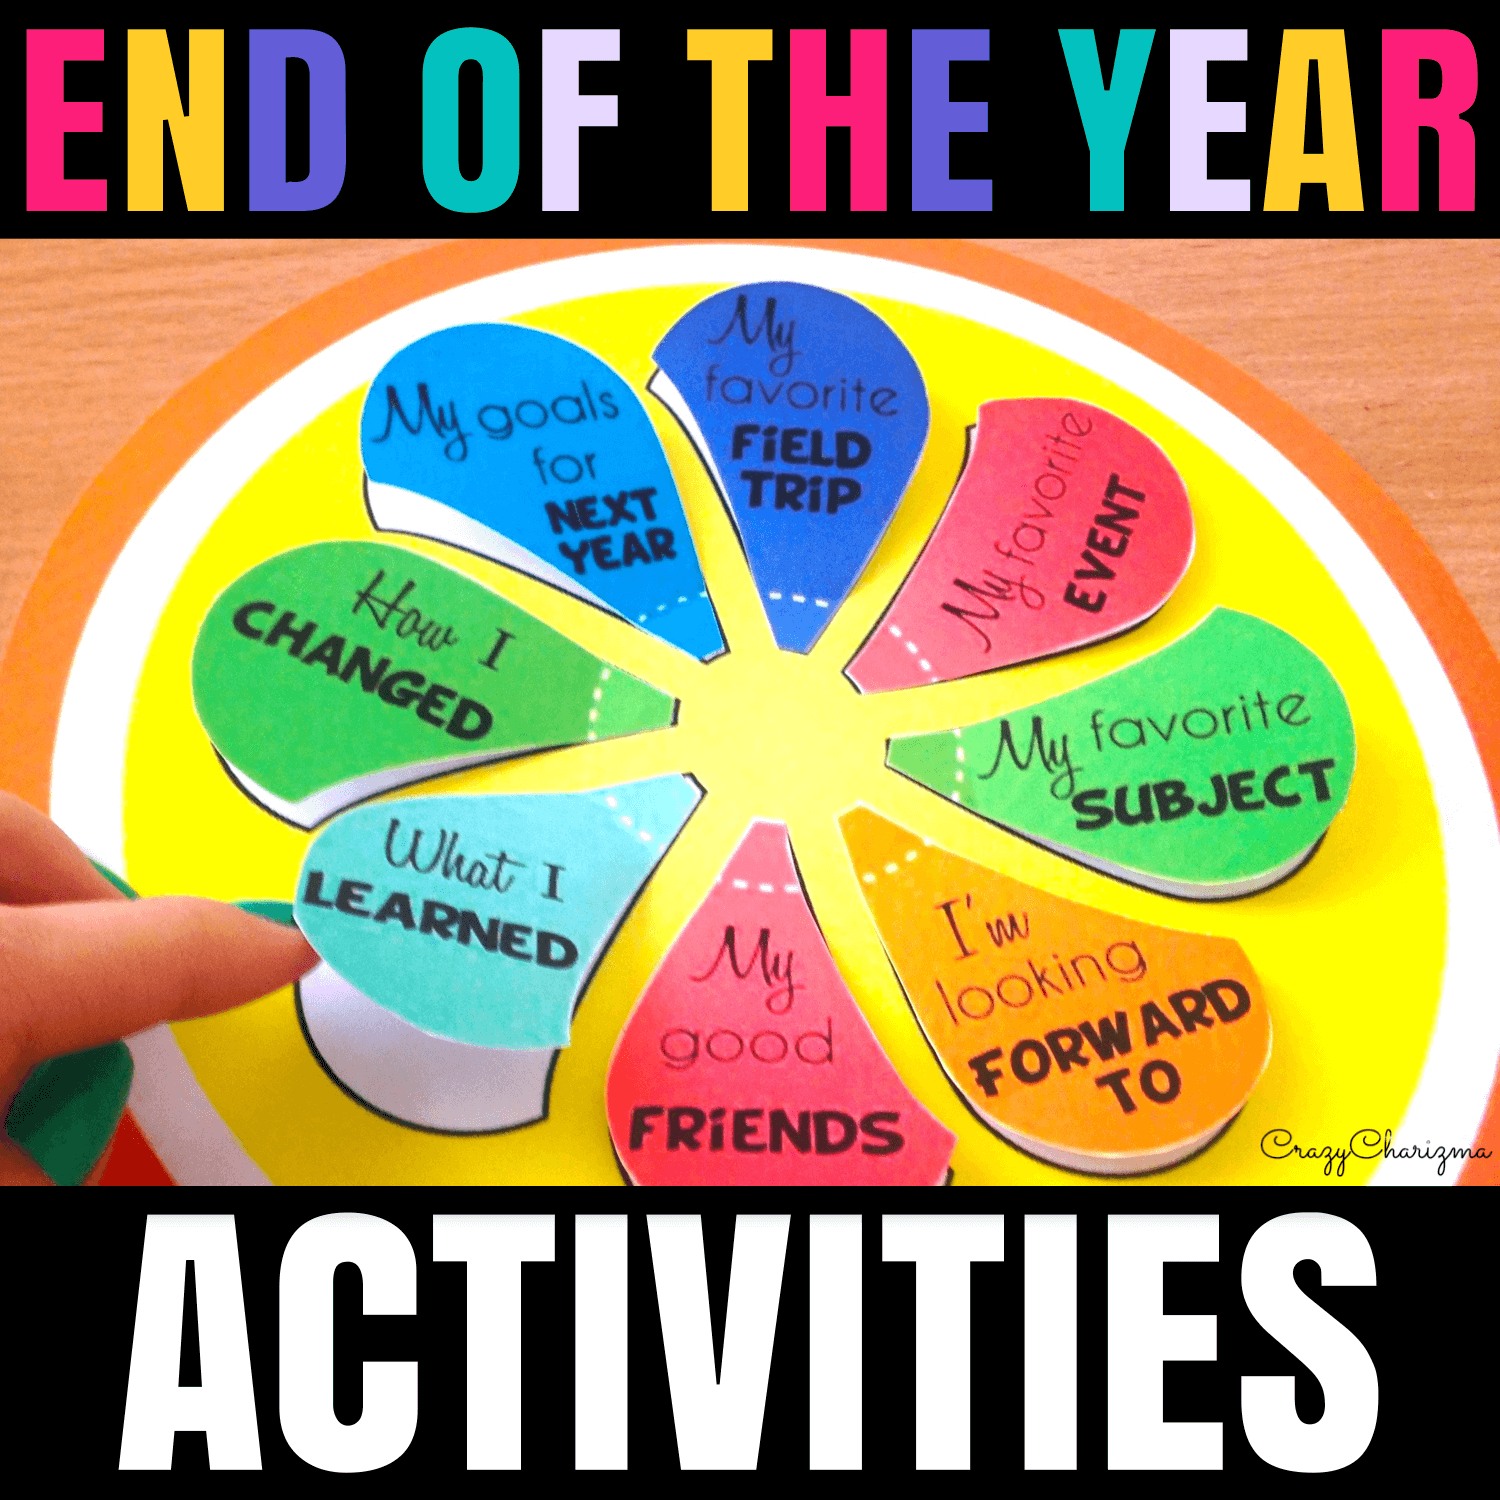 End of the year activities for kids